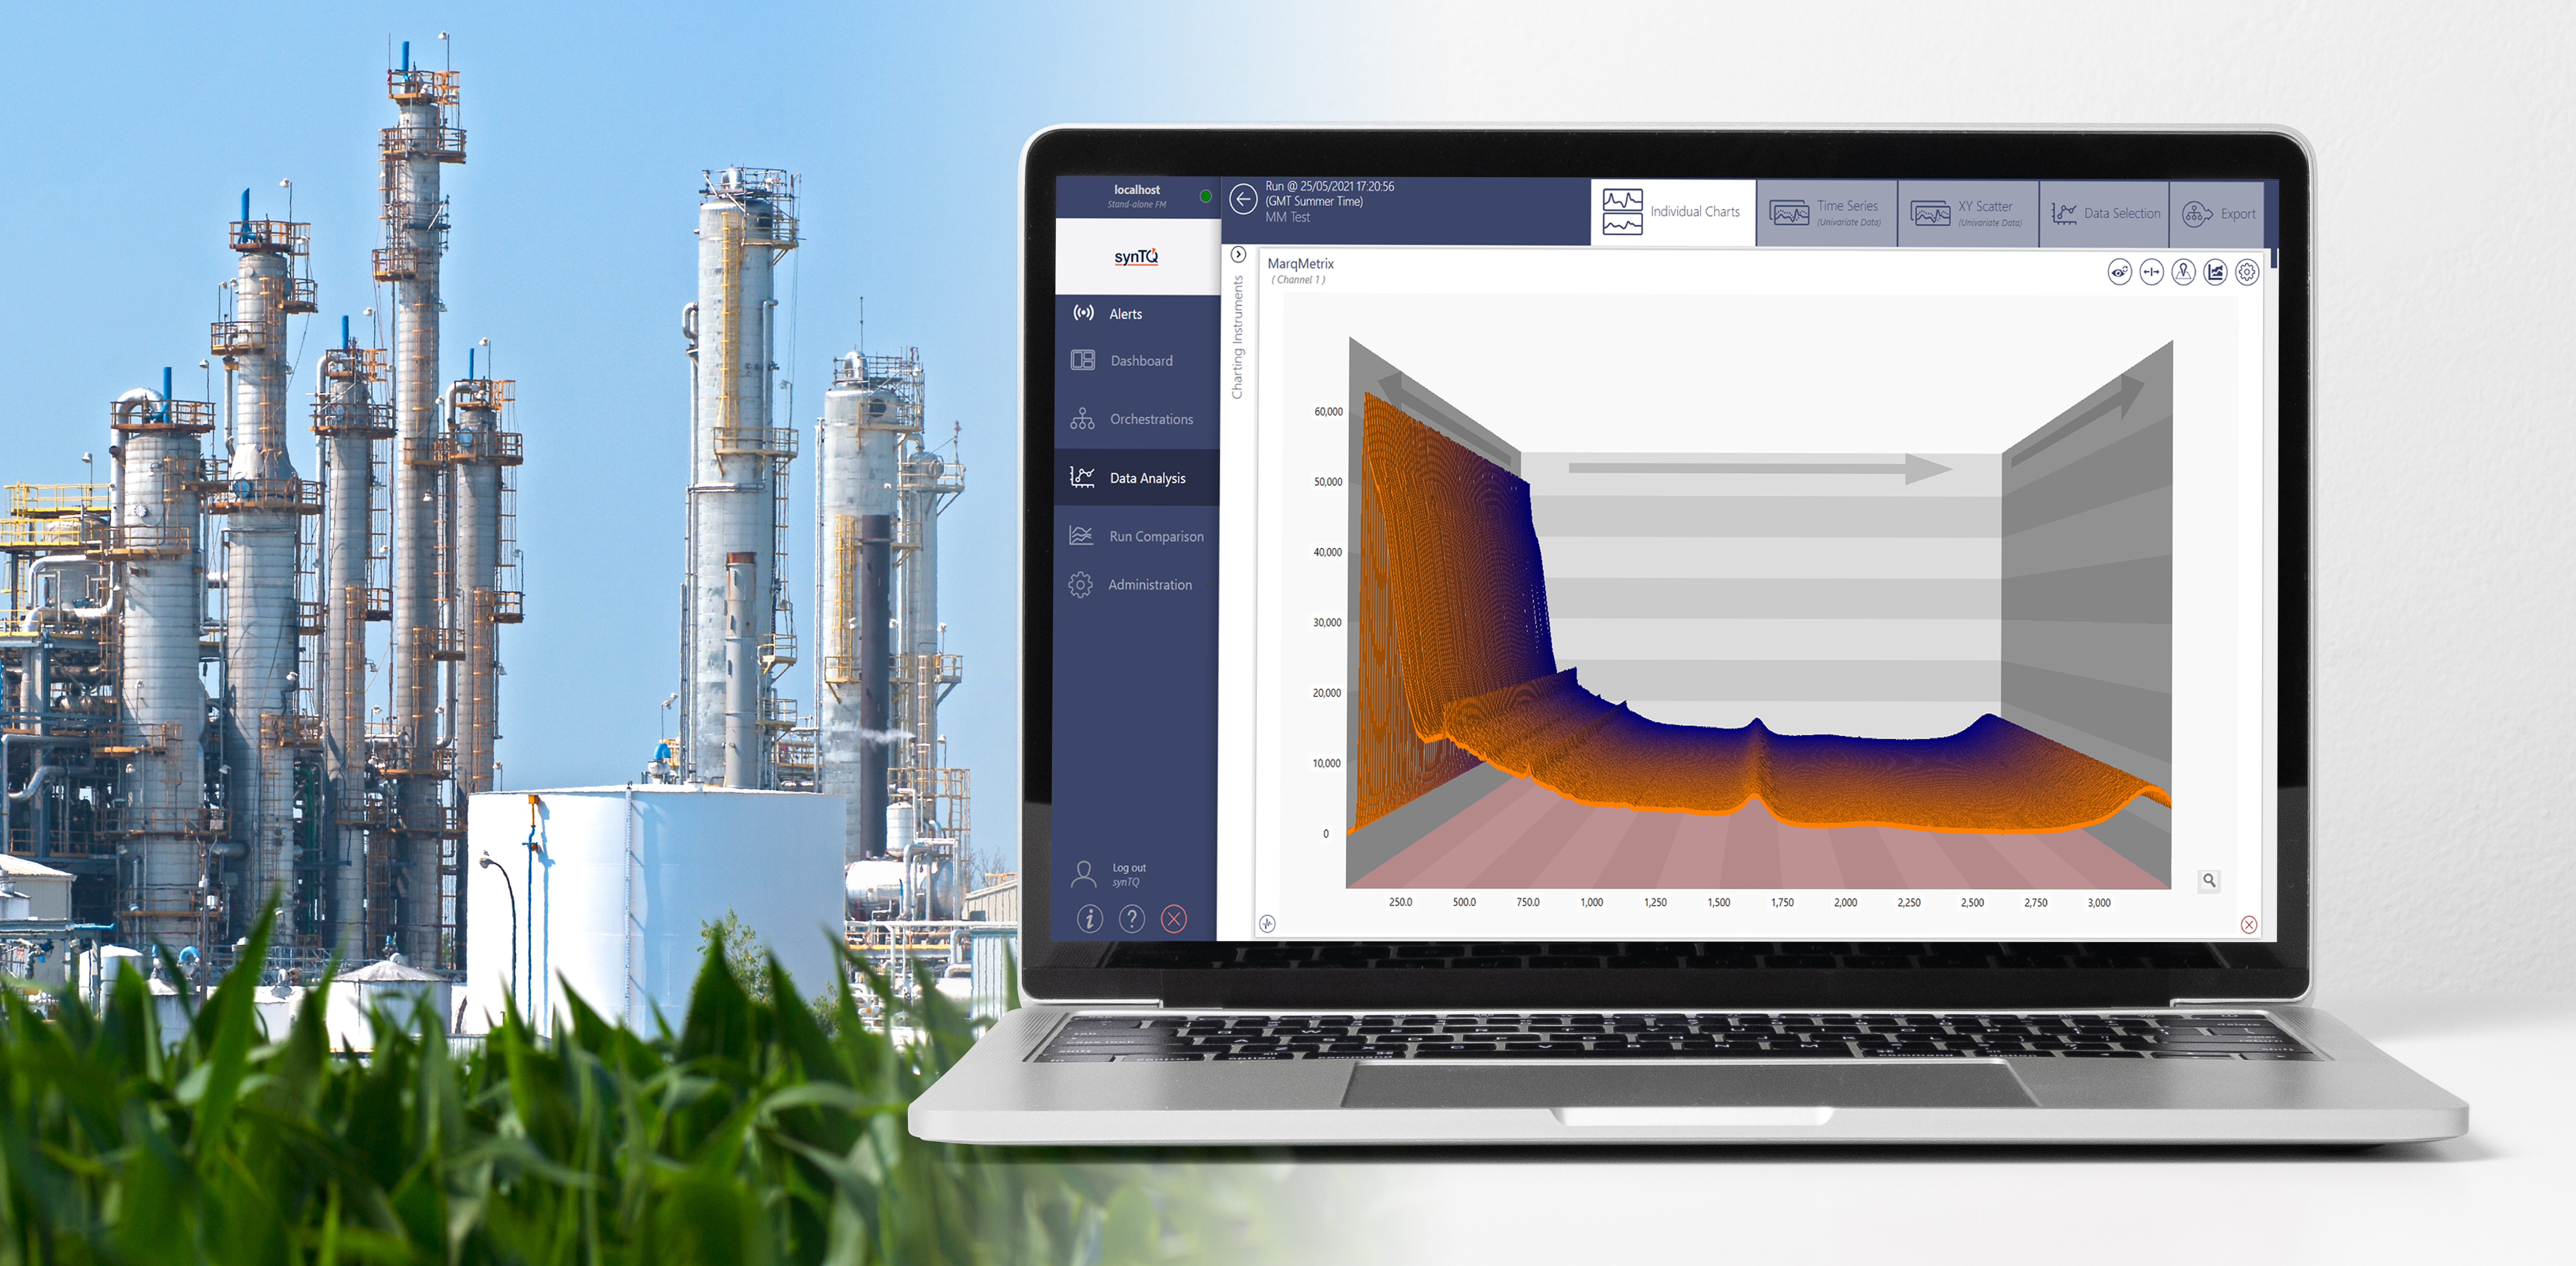 Effective, data-driven process control can help conventional oil refineries to adopt sustainable feedstocks to produce greener fuels. (Image Source: iStock: 154926071)